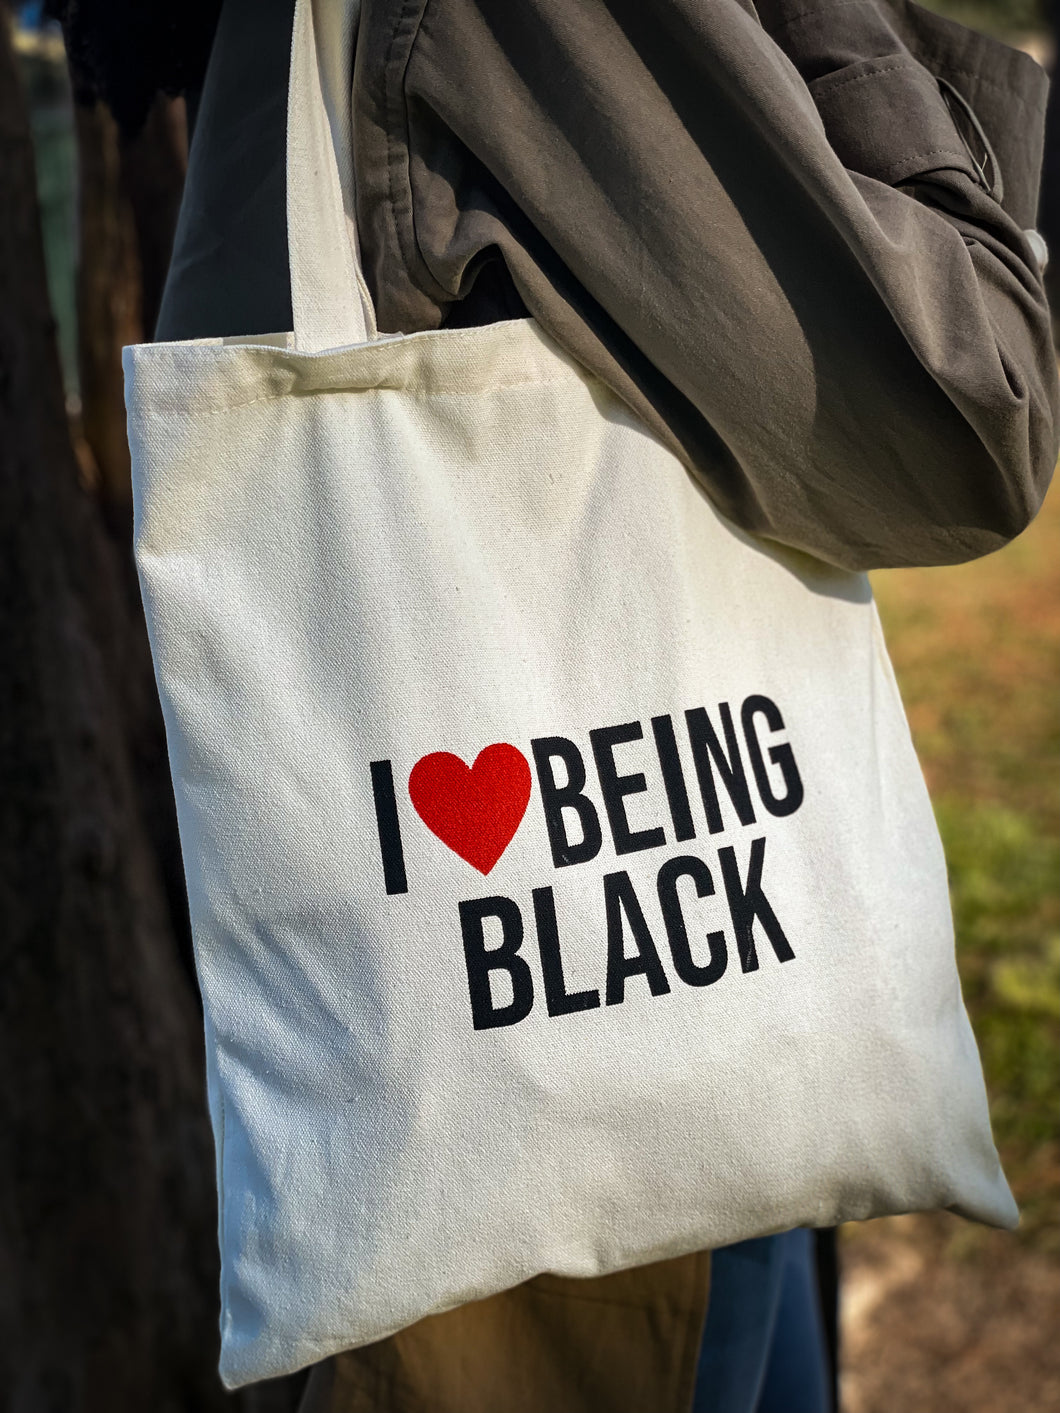 Use this I love Being Black tote bag for a visit to the library, day at the beach or a day of grocery shopping. Super cute and aesthetic tote bag for men and women.